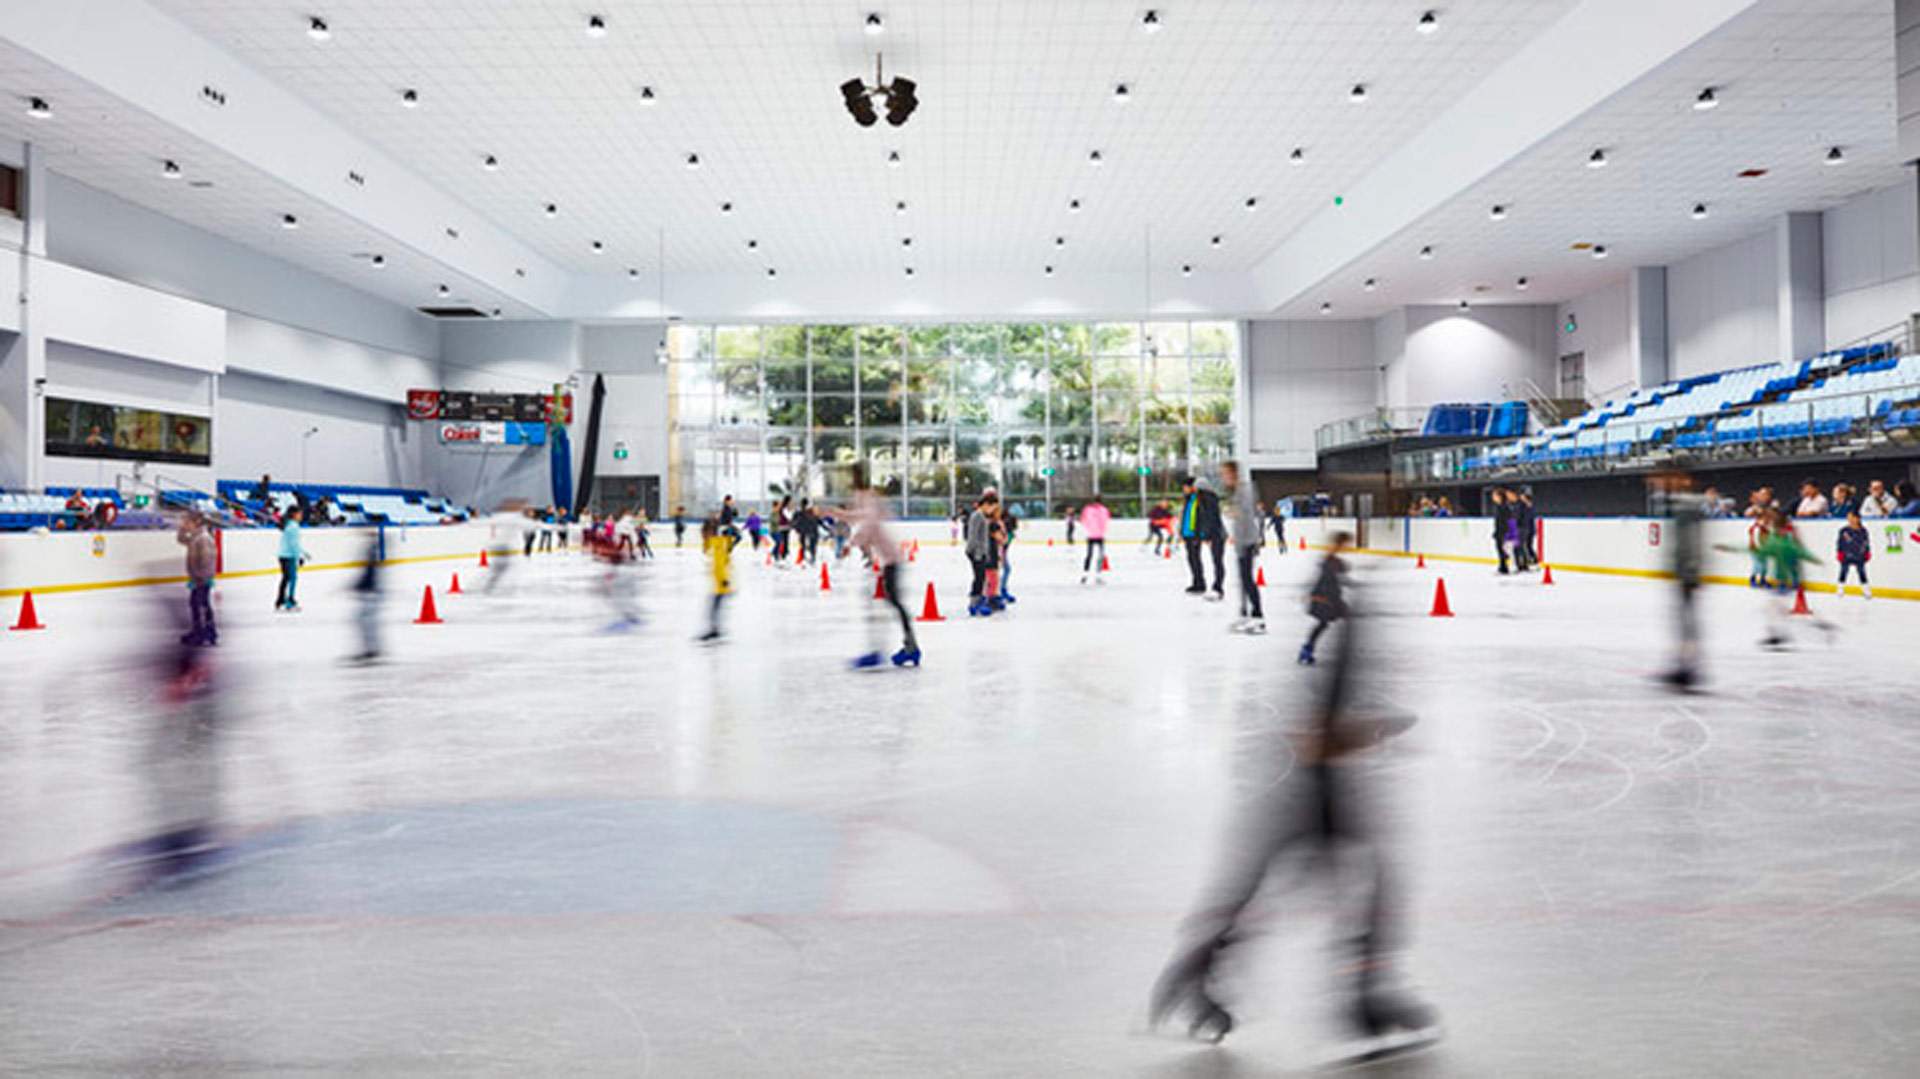 Plans to Demolish North Ryde's Beloved Macquarie Ice Rink Have Been Put on Hold